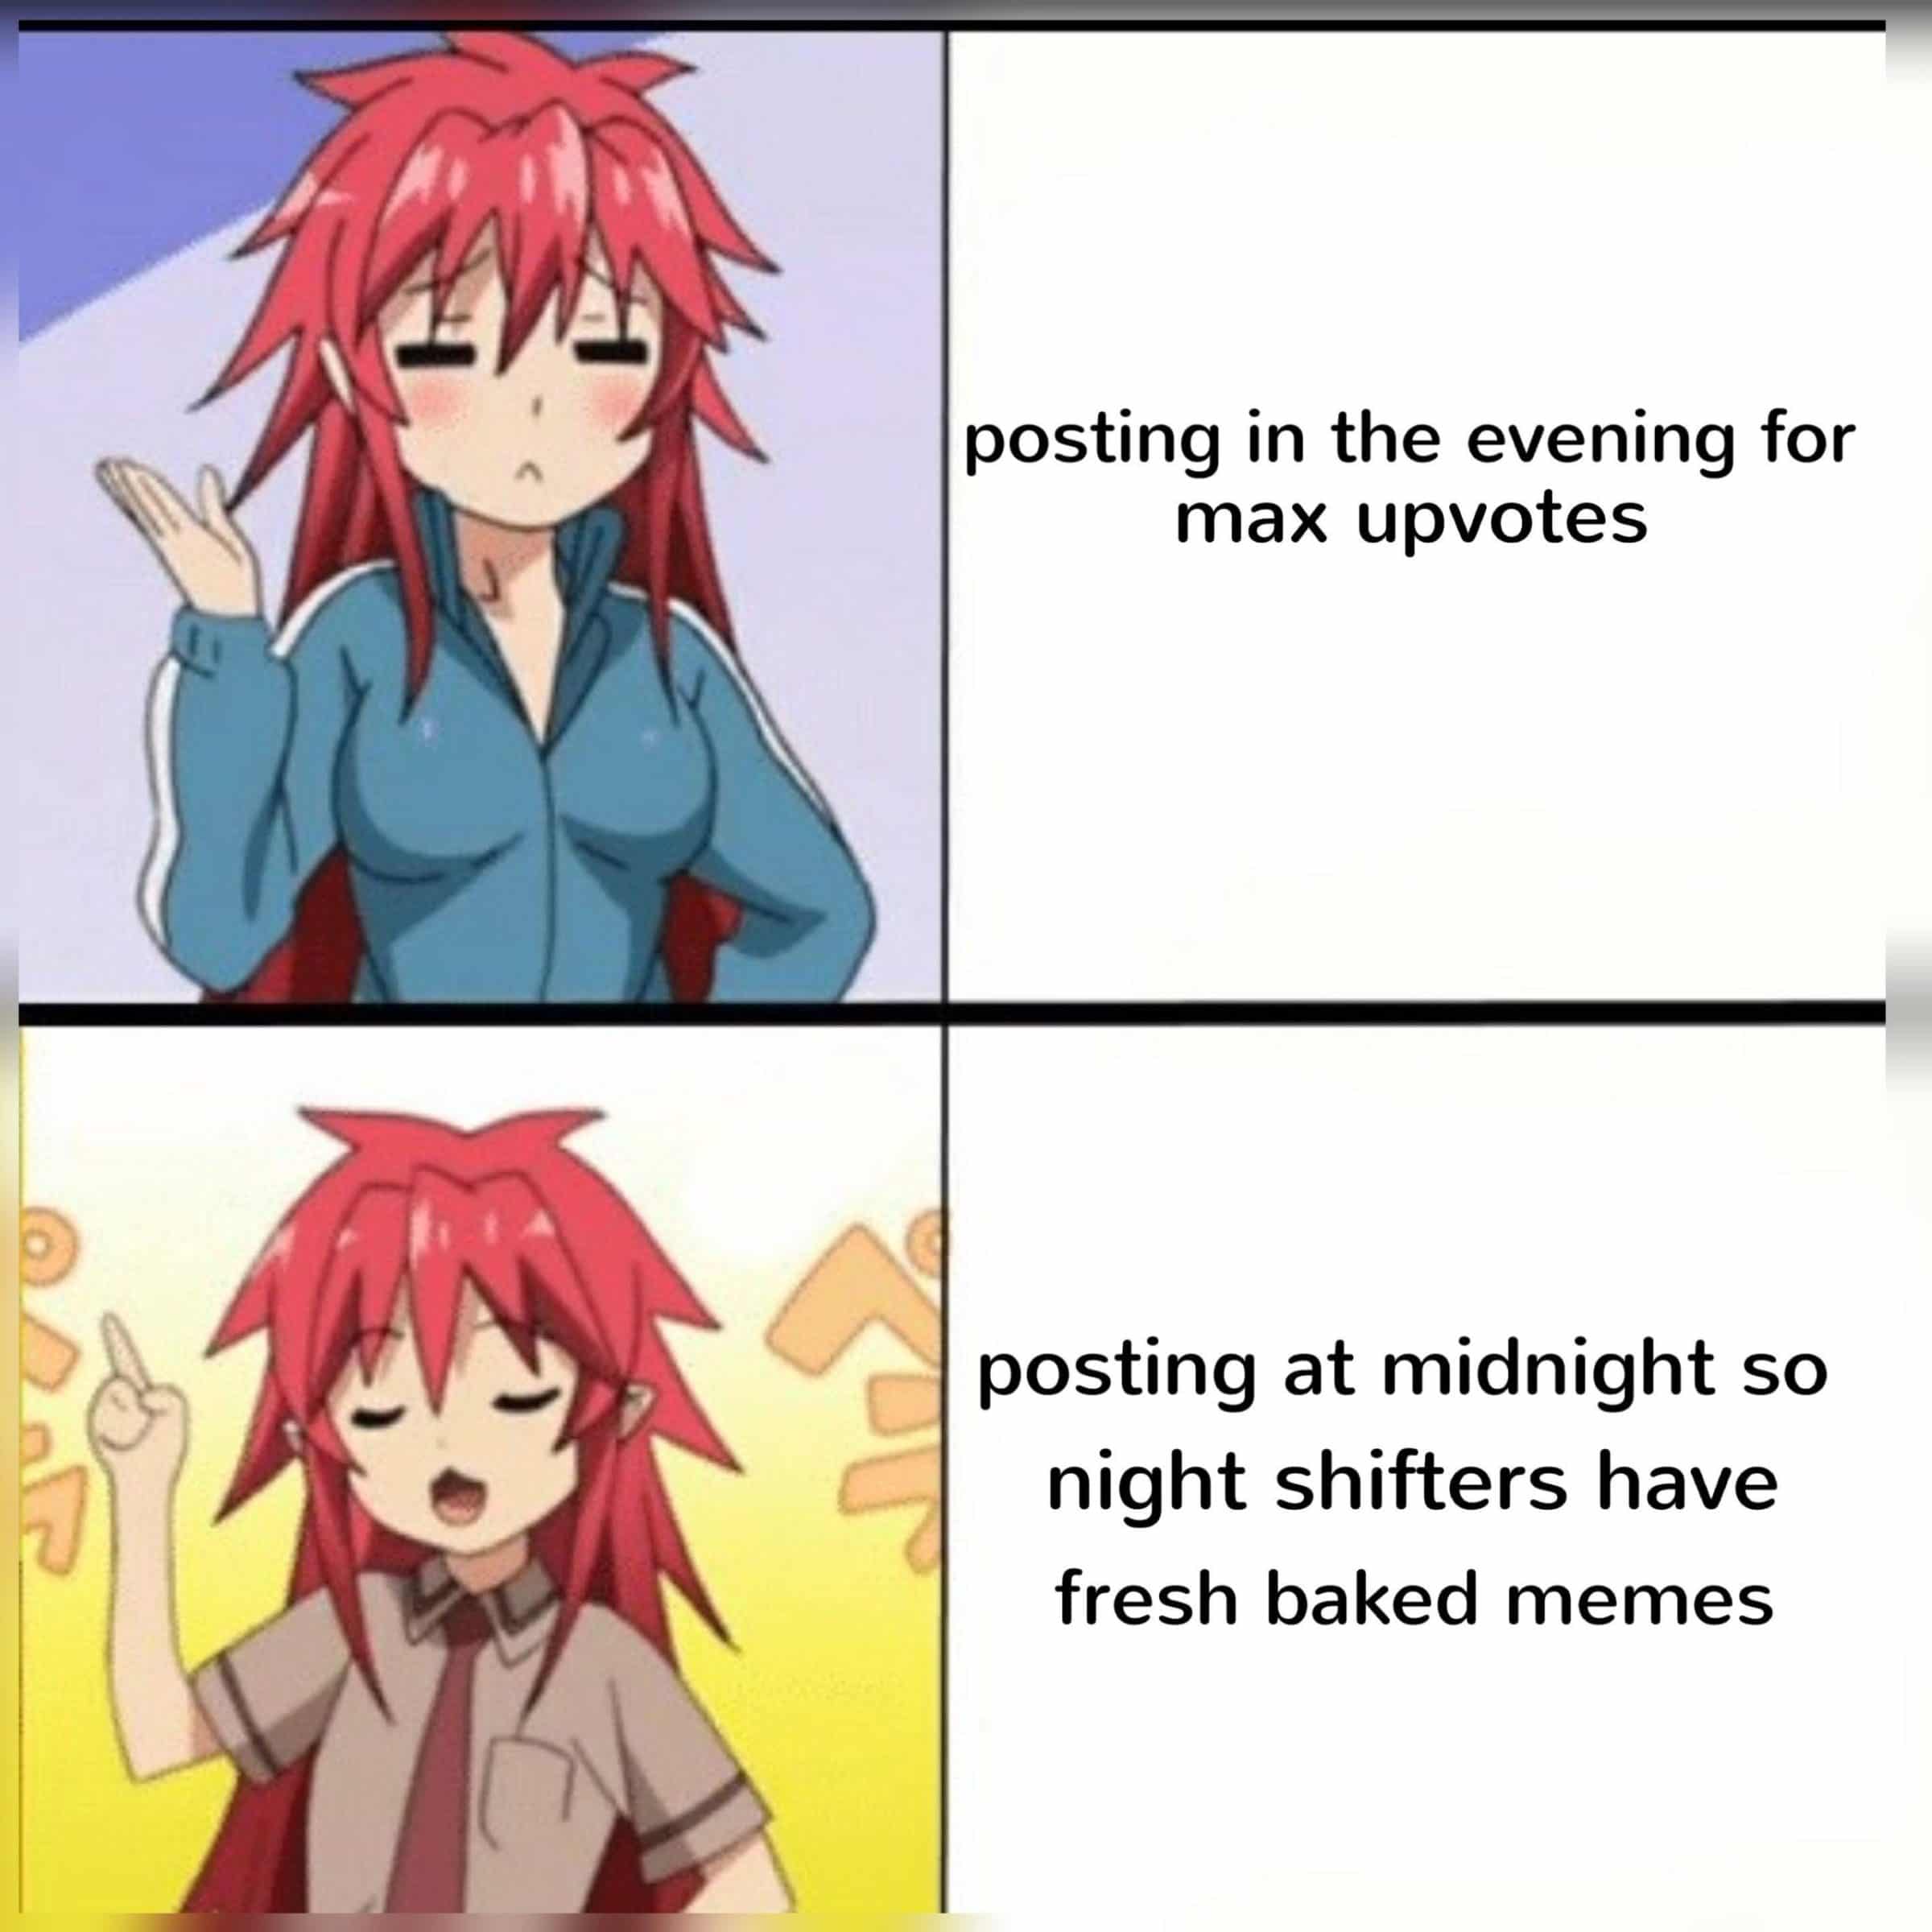 anime anime-memes anime text: posting in the evening for max upvotes posting at midnight so night shifters have fresh baked memes 